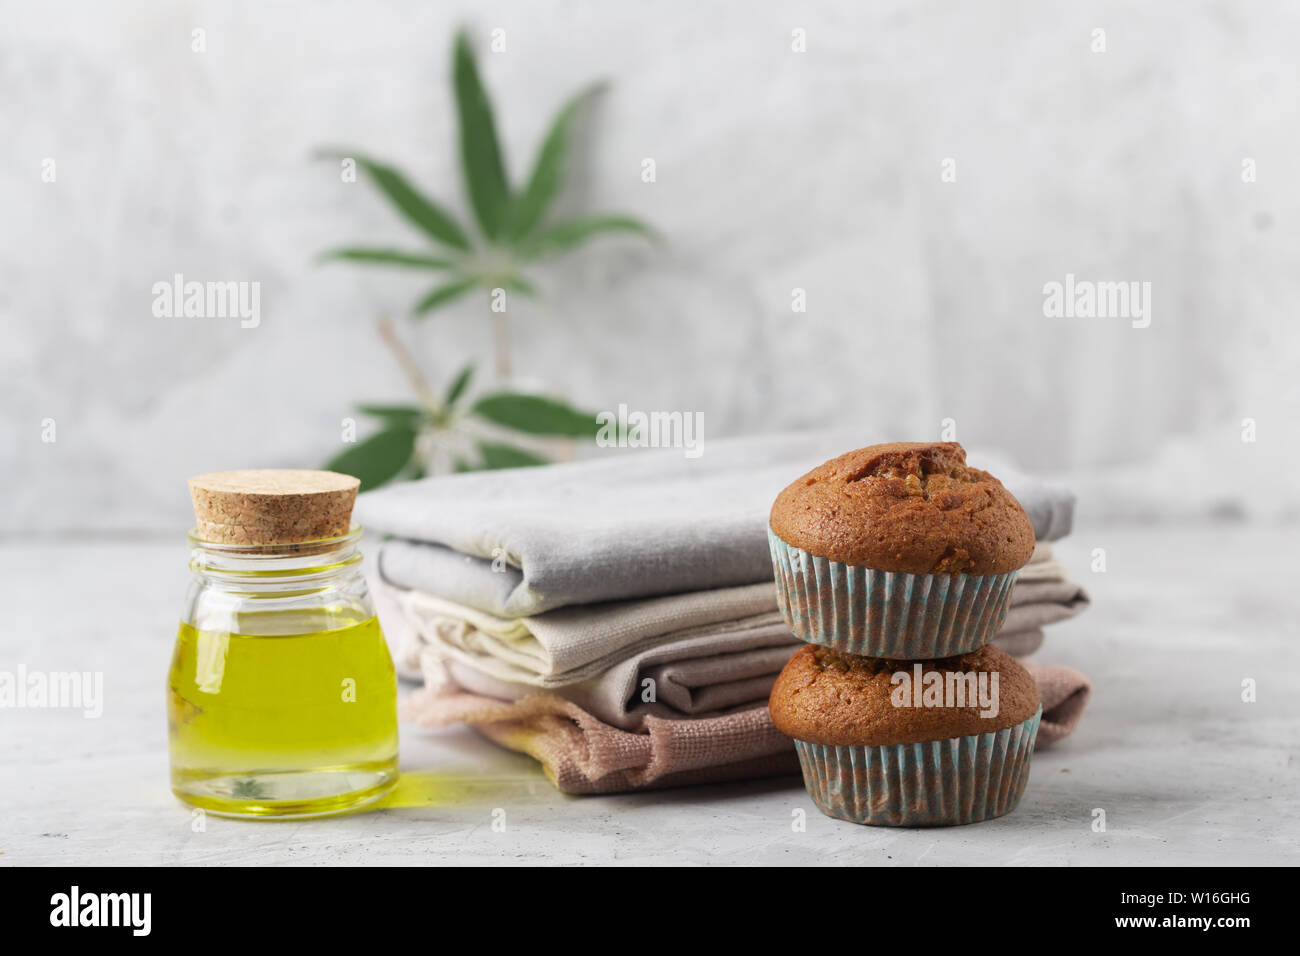 Different products from marijuana. Baking muffins from cannabis, natural CDB fabric and oil. Gray background Stock Photo